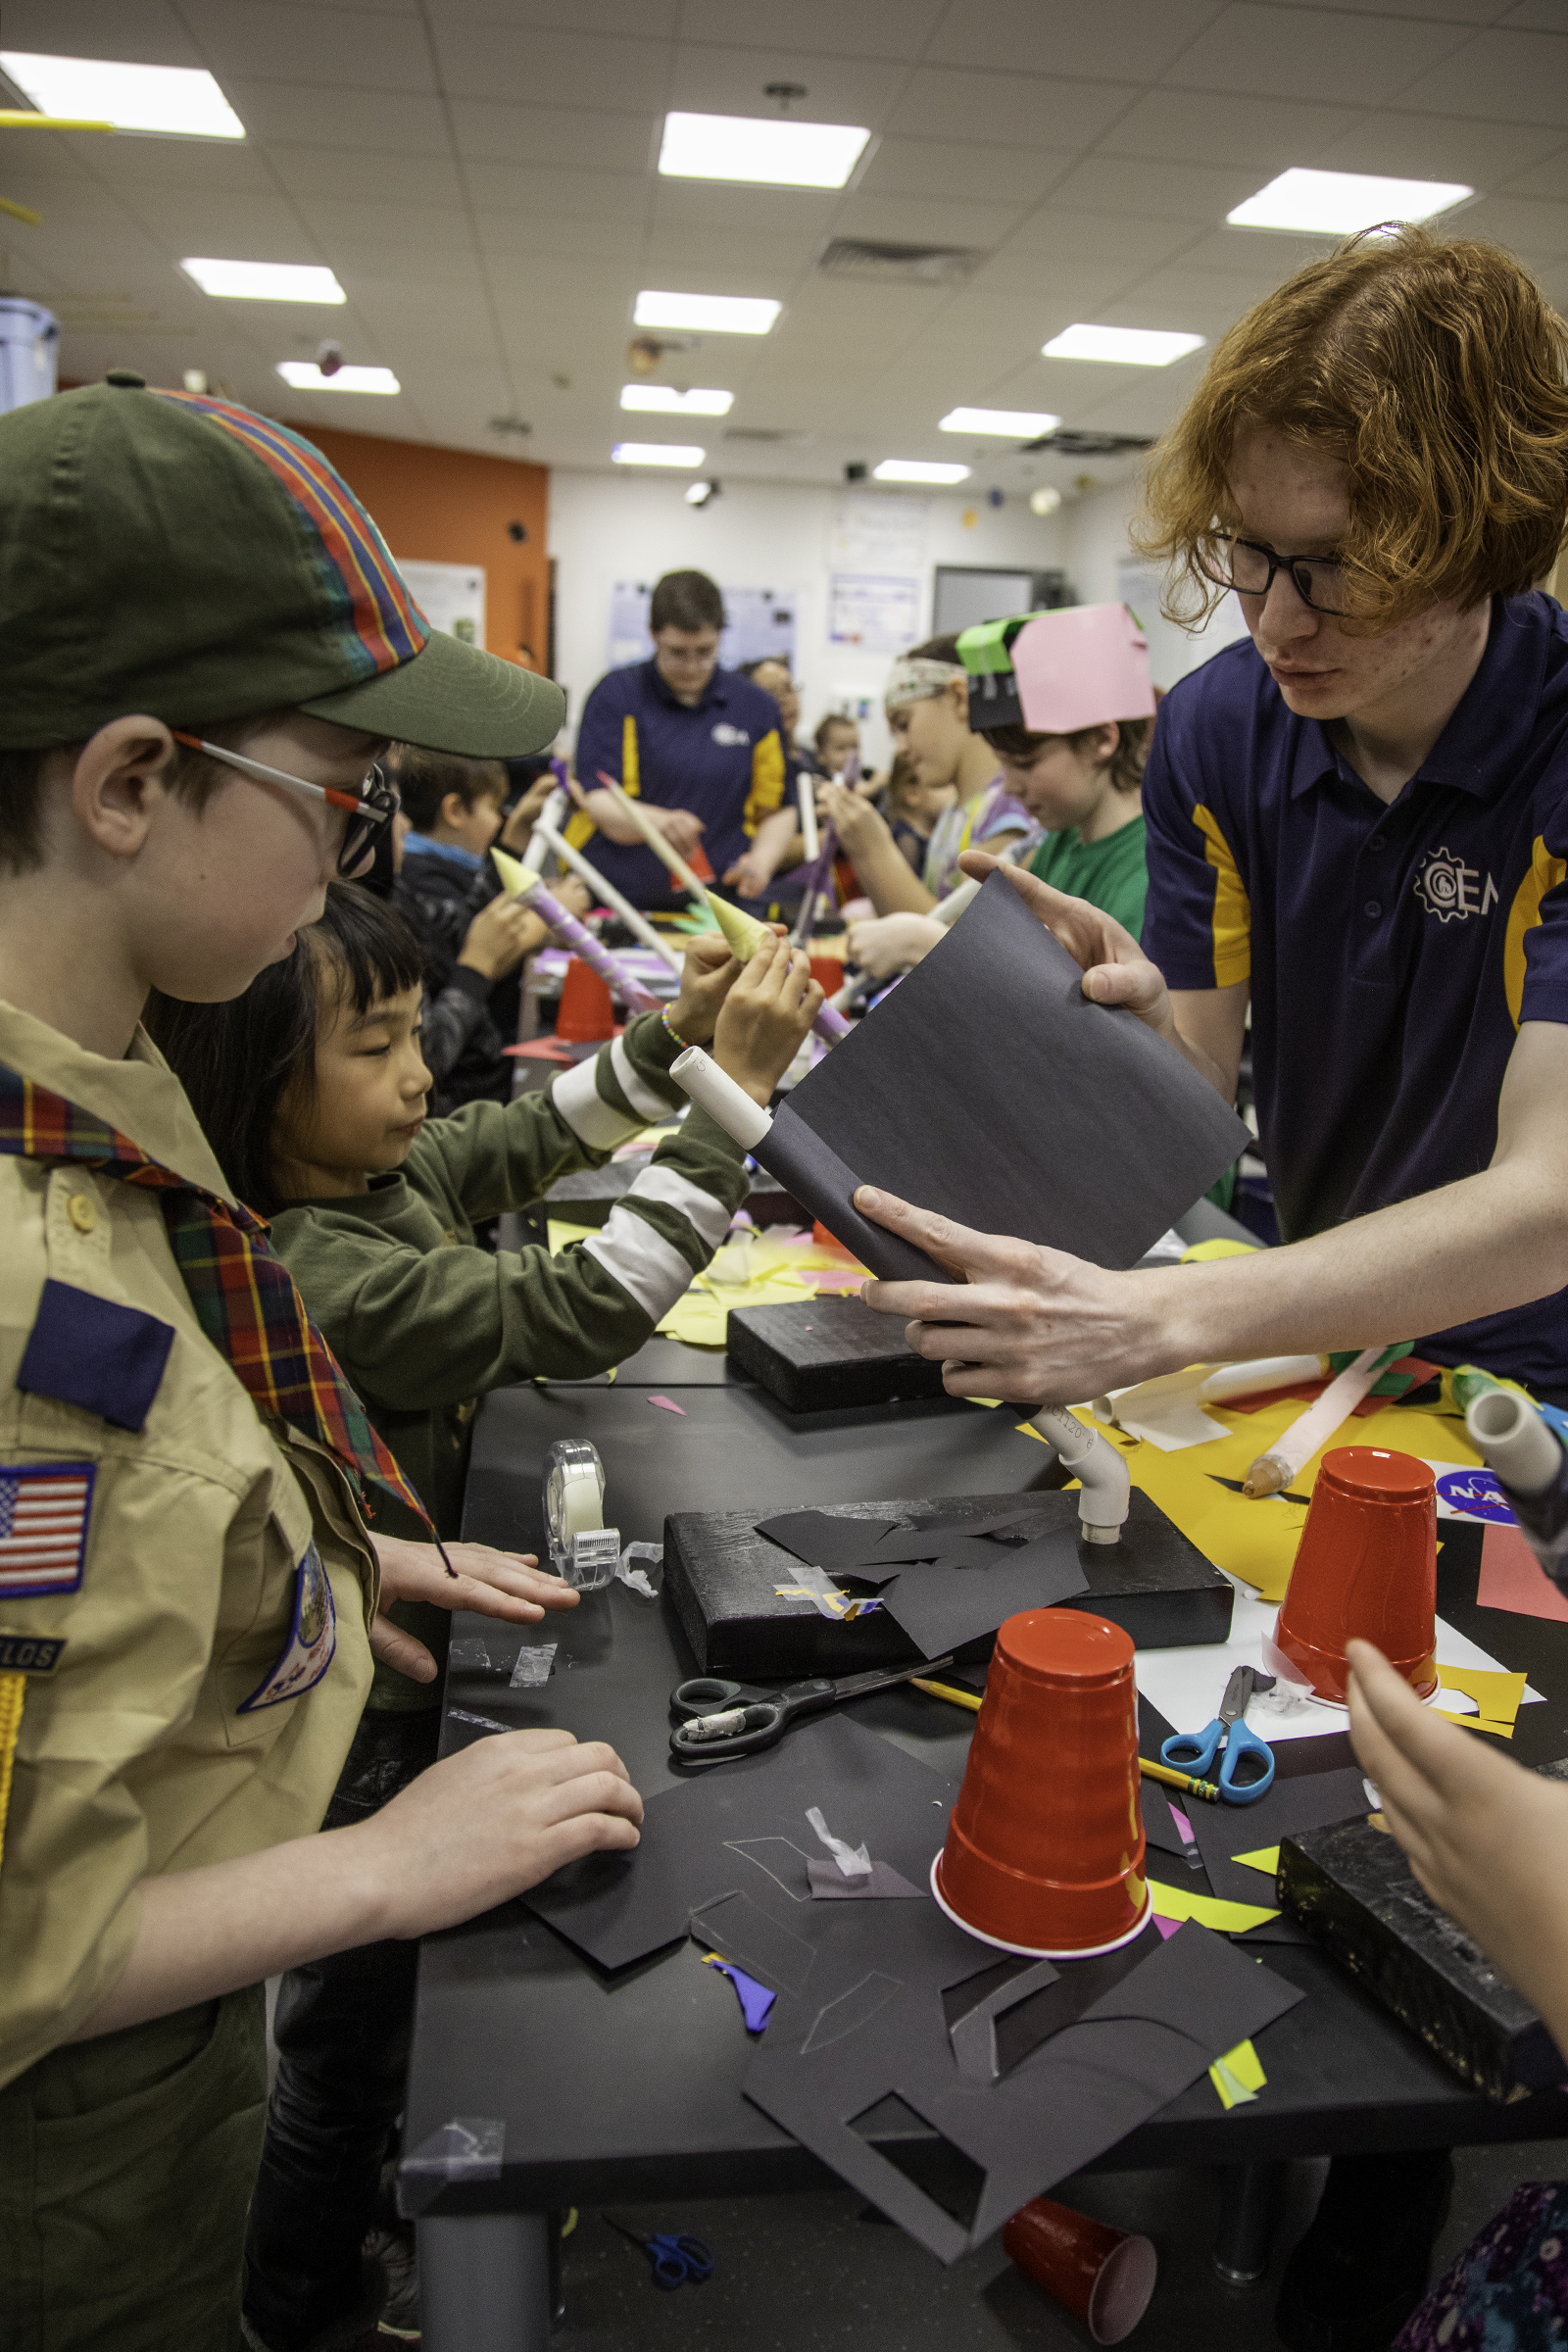 A college student helps a Boy Scout and other children construct a paper rocket.